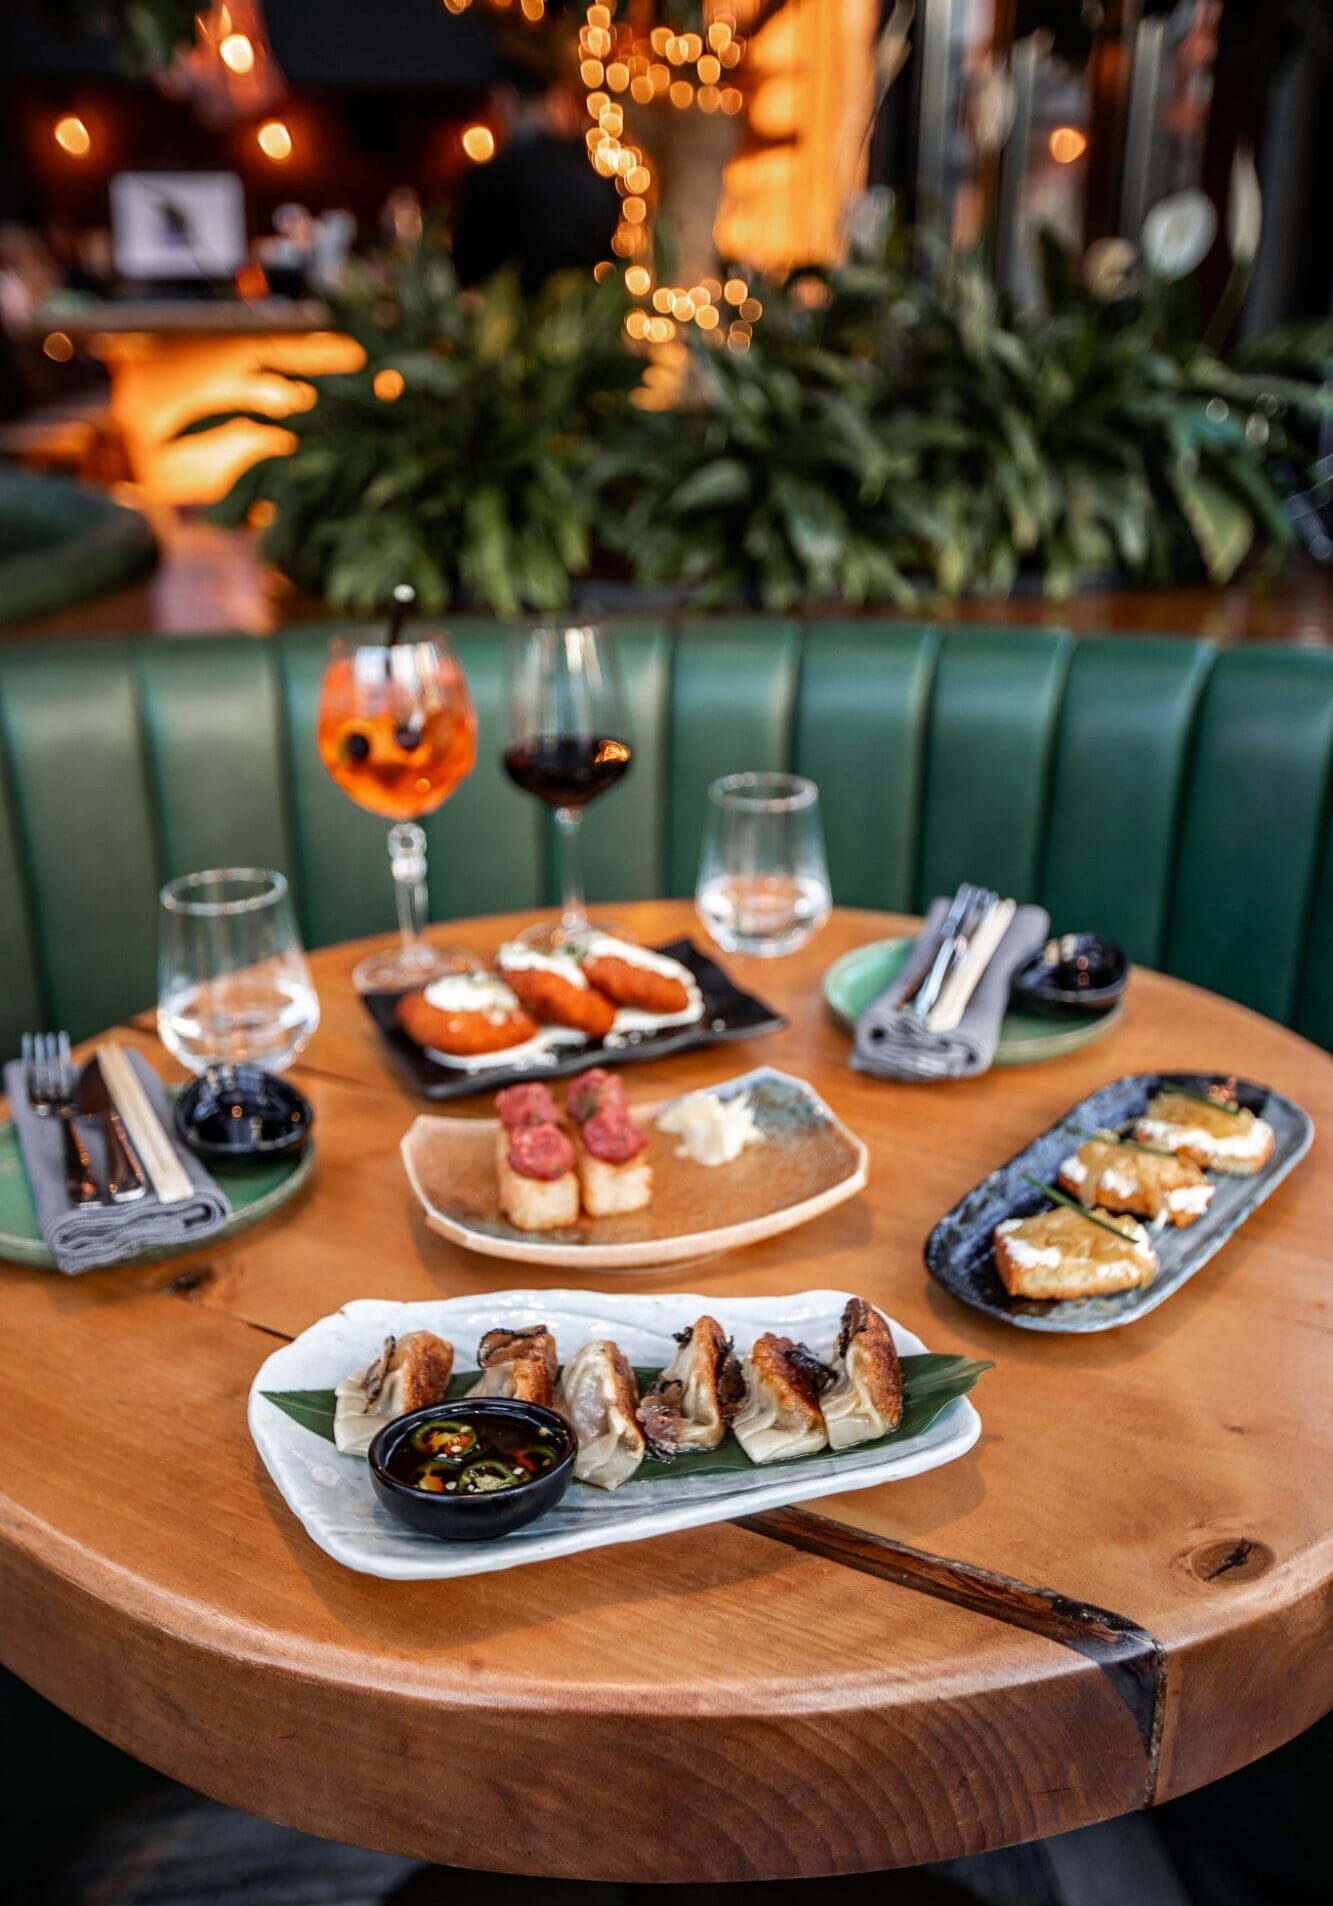 A selection of small plates including gyoza, crispy rice, and goats cheese crostini on a round wood table surrounded by a green leather booth and foliage.